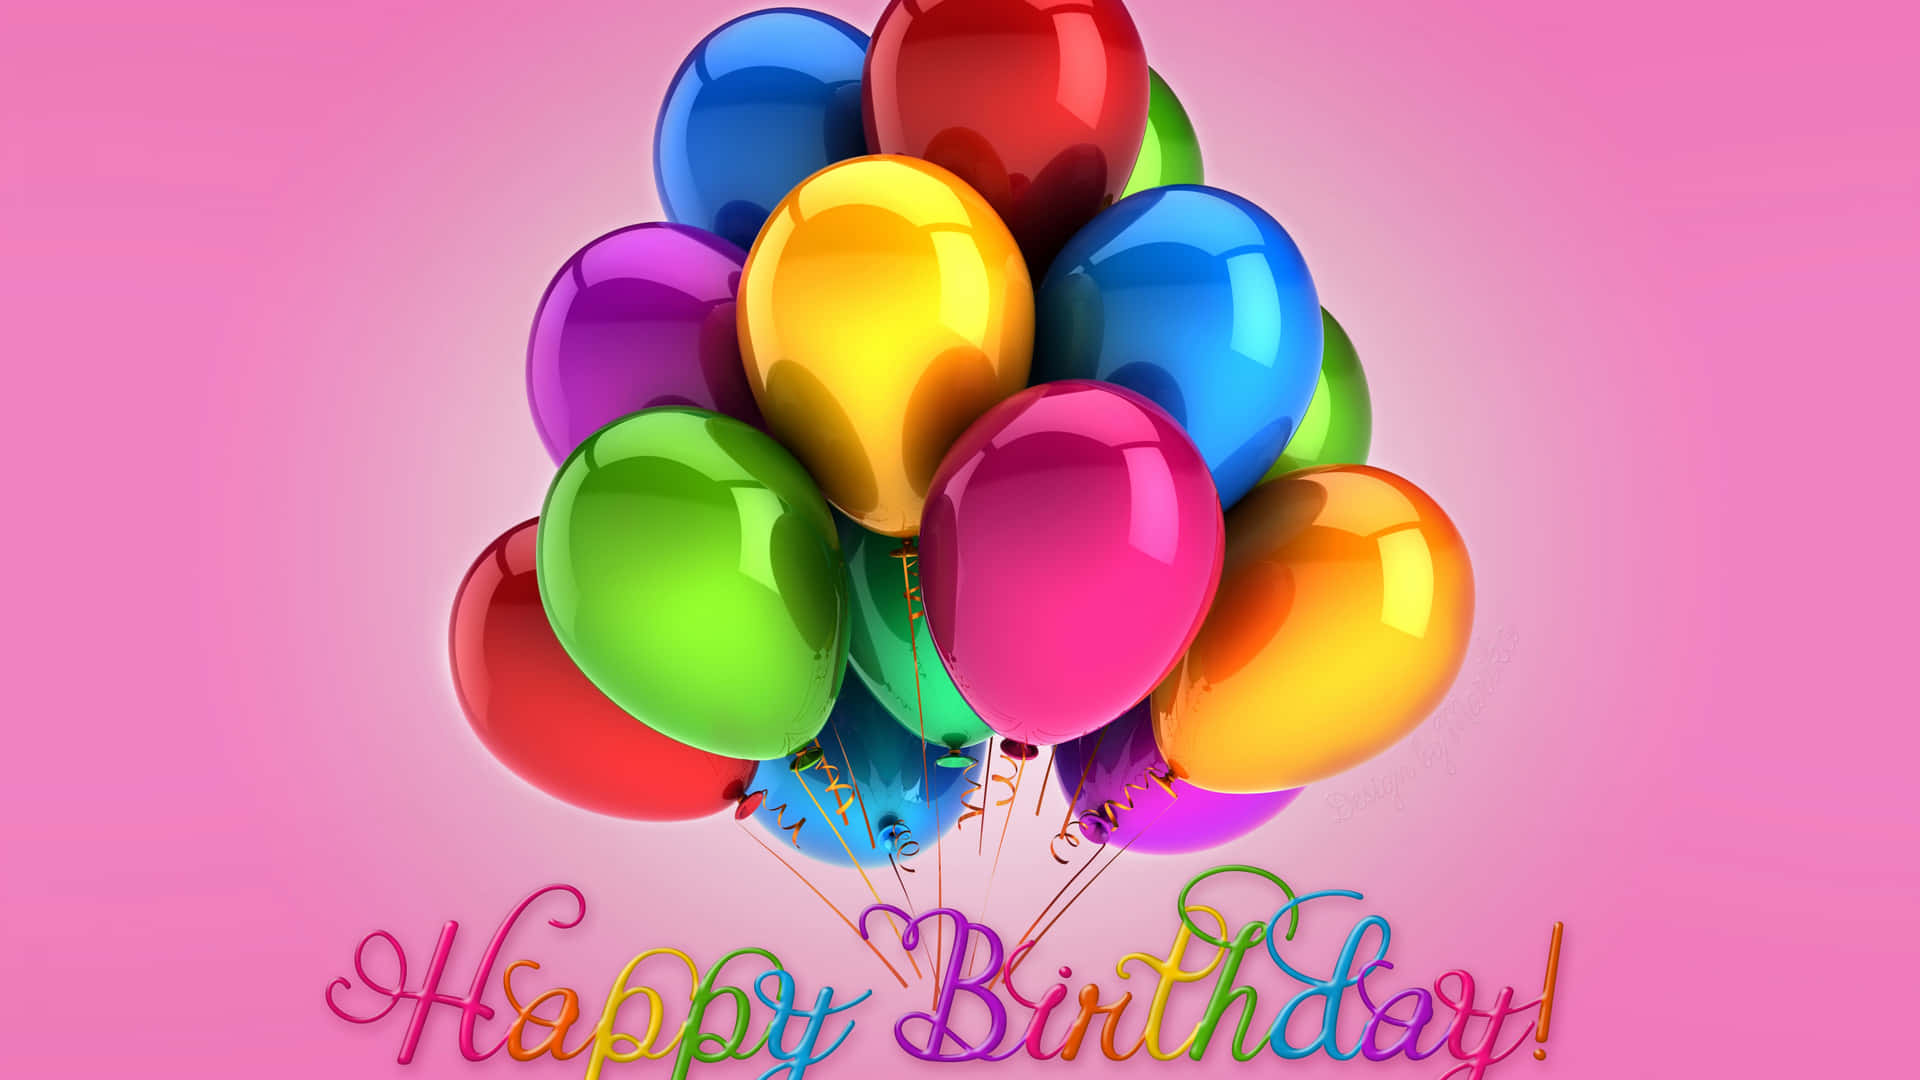 Enjoy a Happy Birthday with this Vibrant High Resolution Background